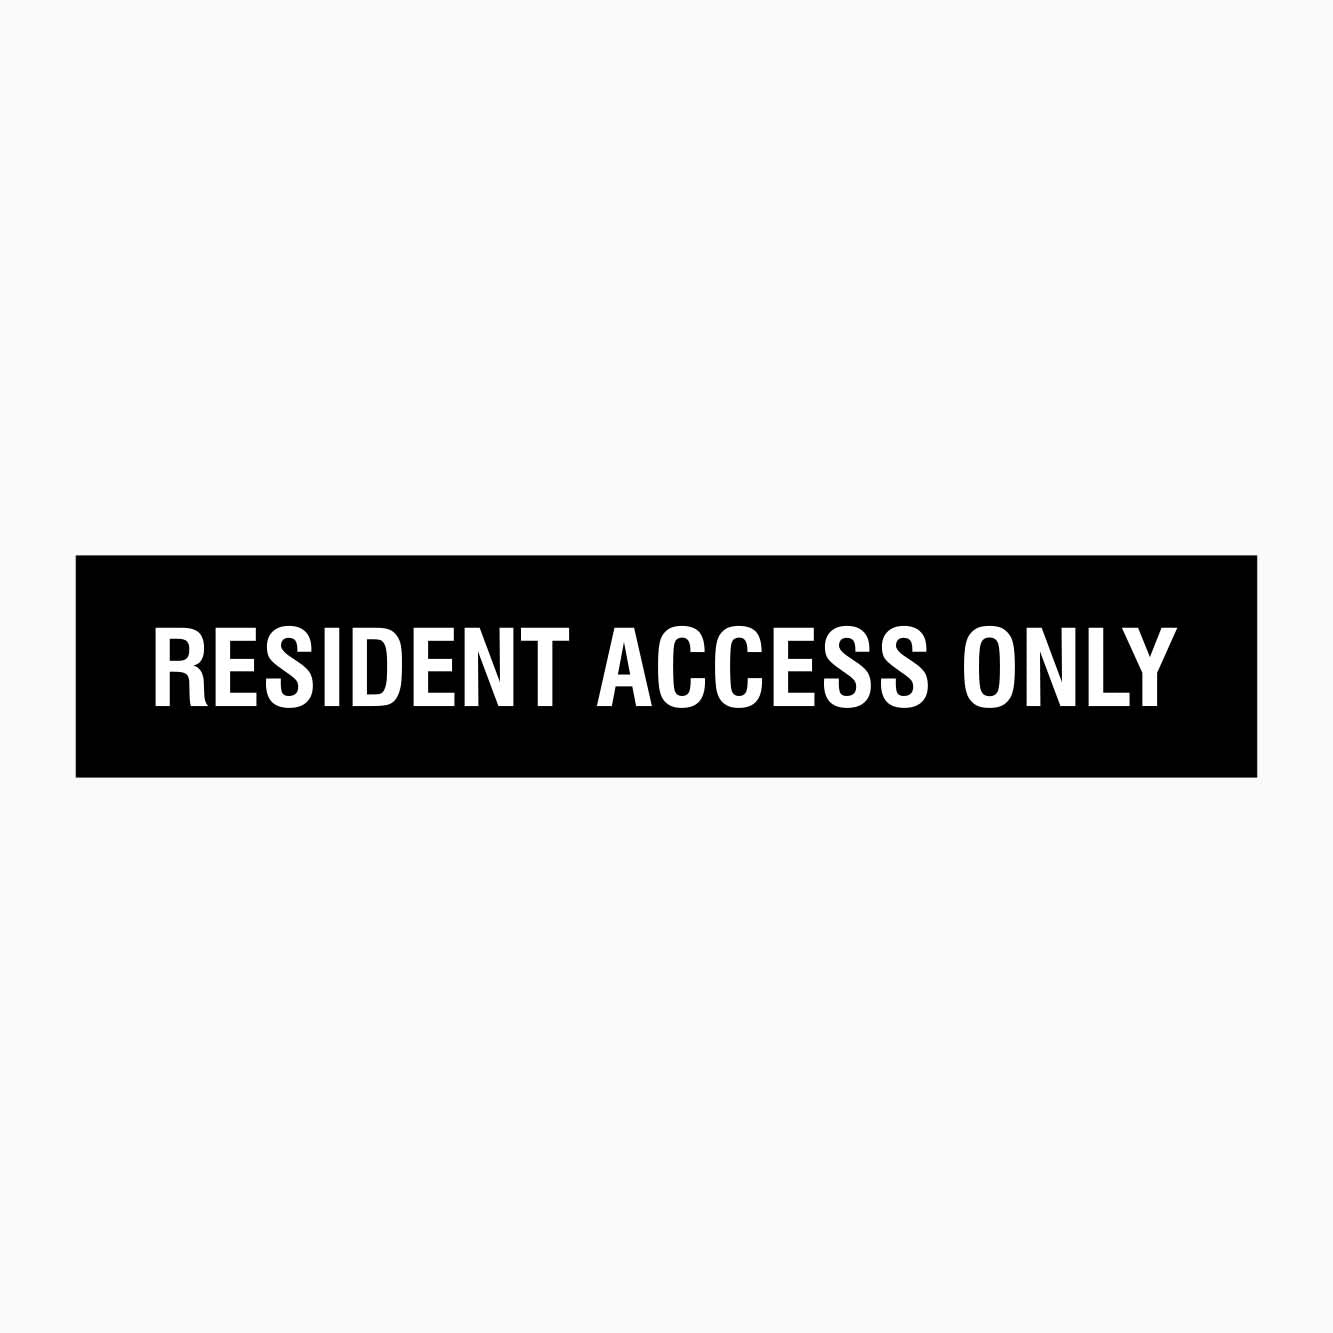 RESIDENT ACCESS ONLY SIGN - GET SIGNS